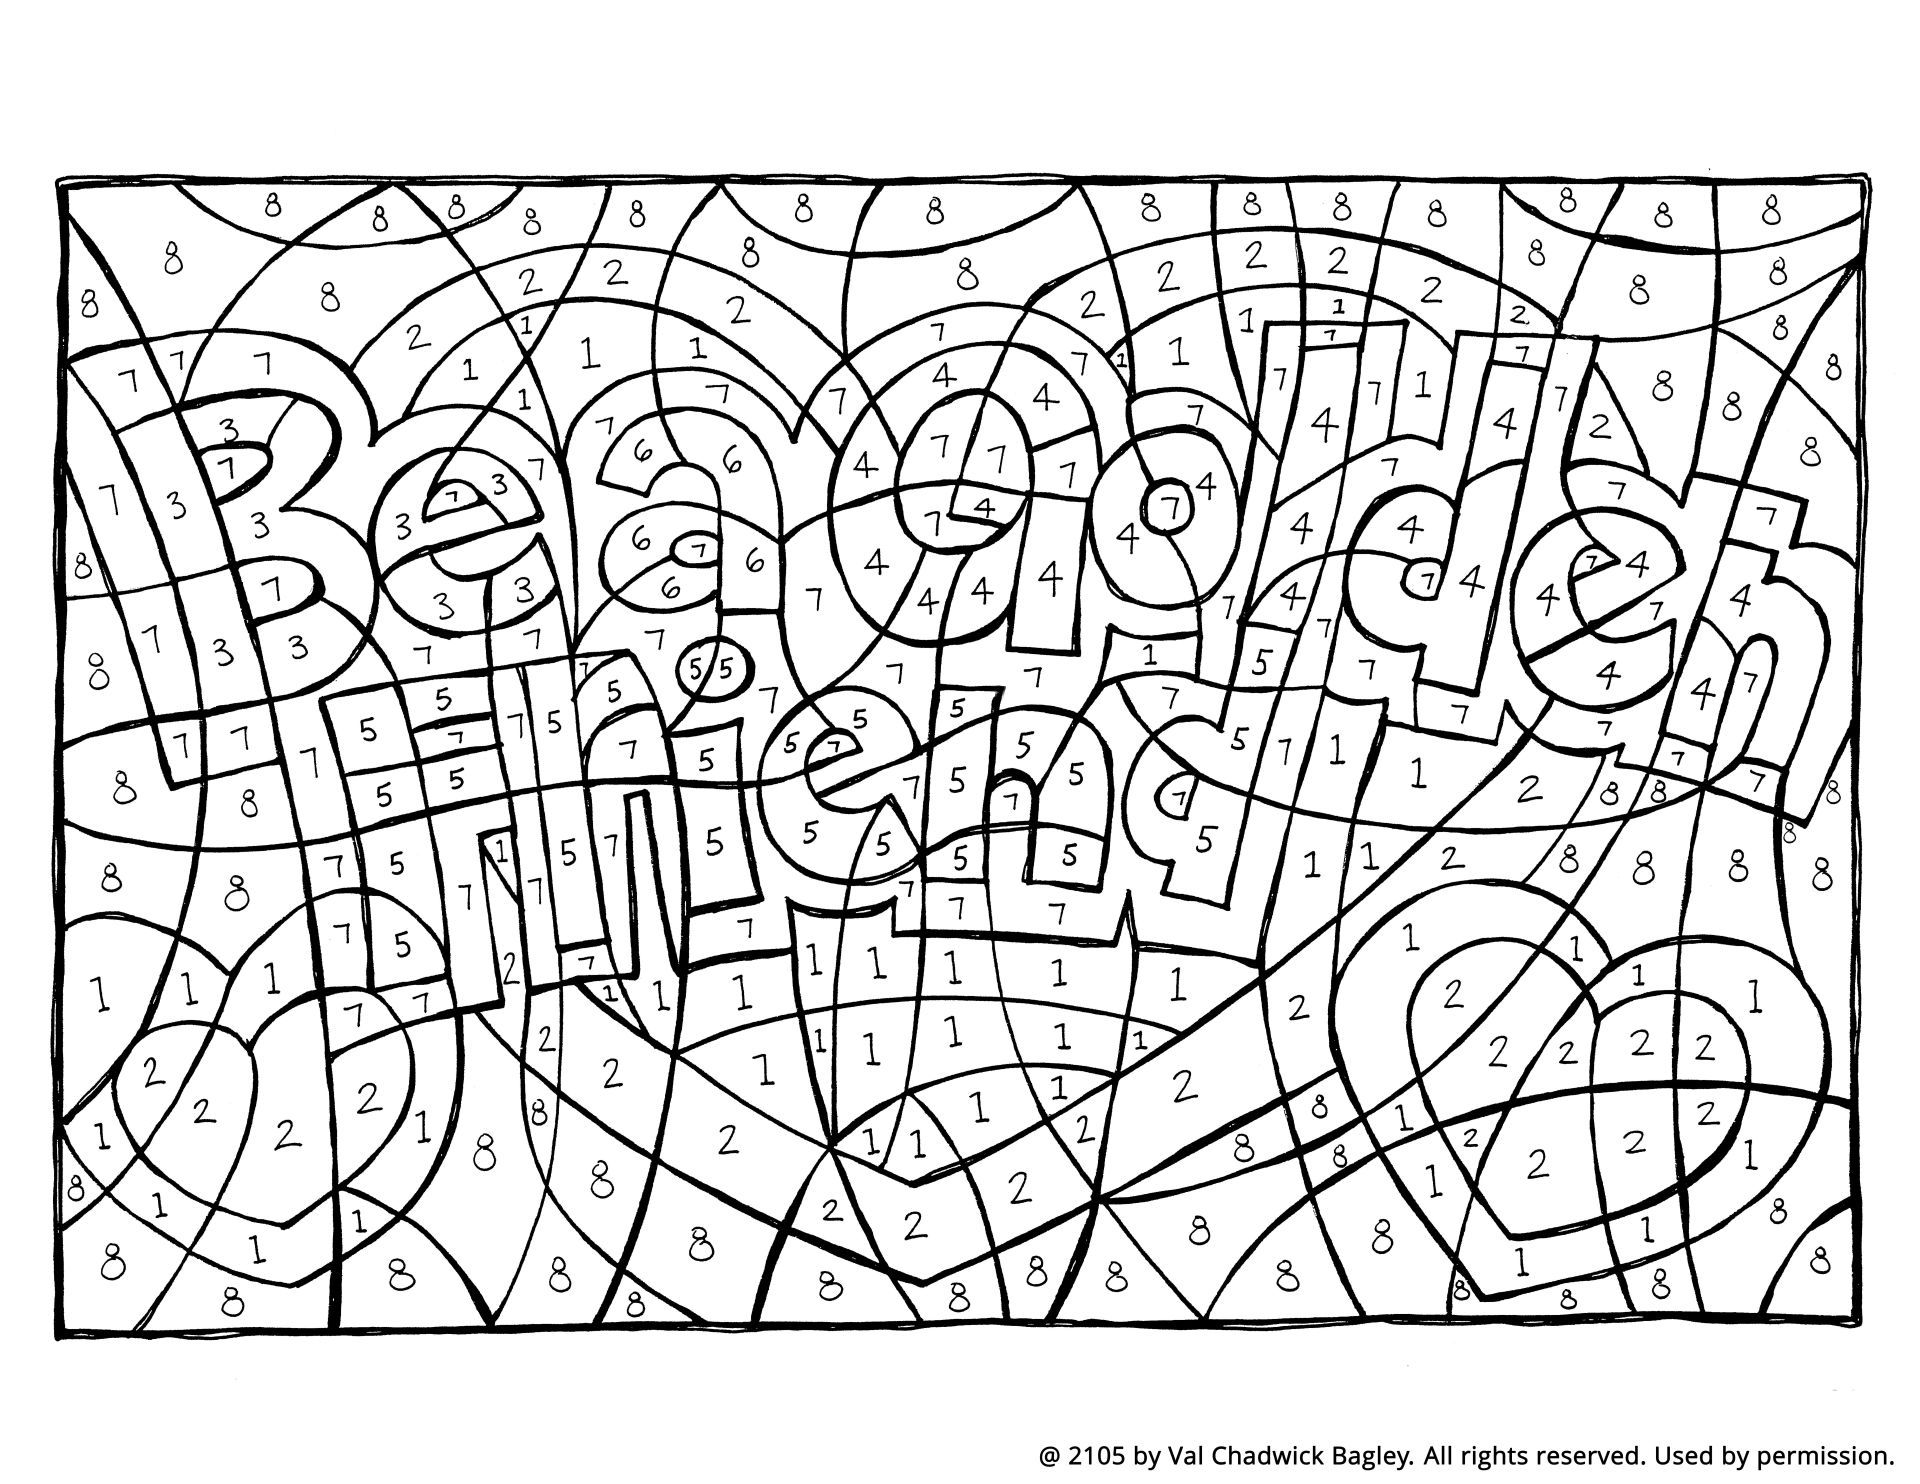 Coloring Pages—General